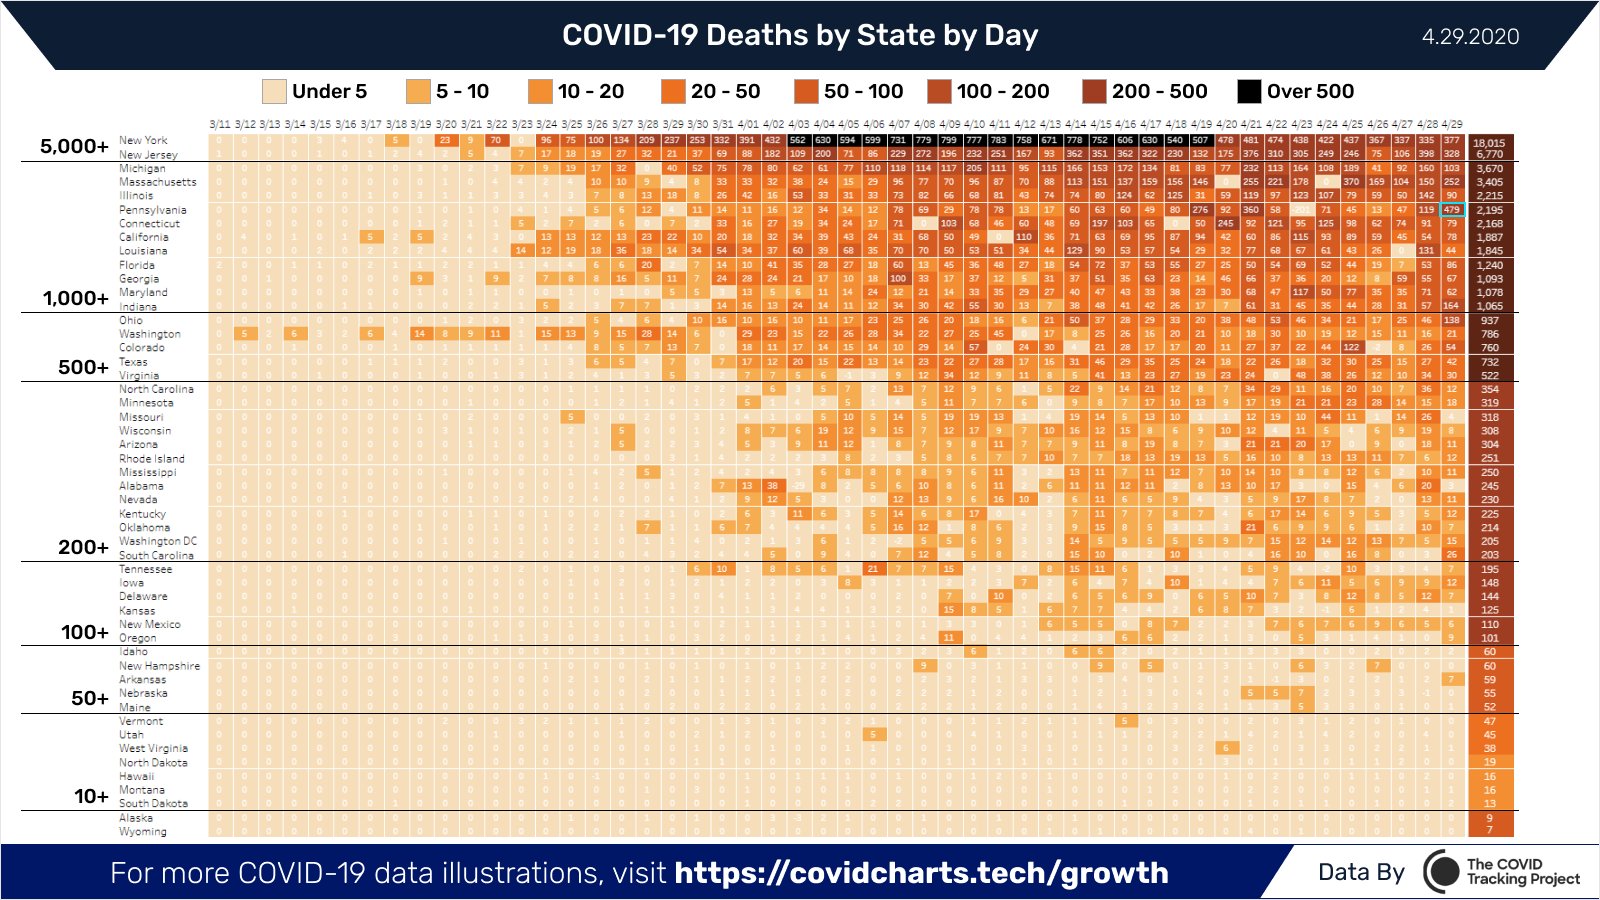 States 'True Up' their death rates.